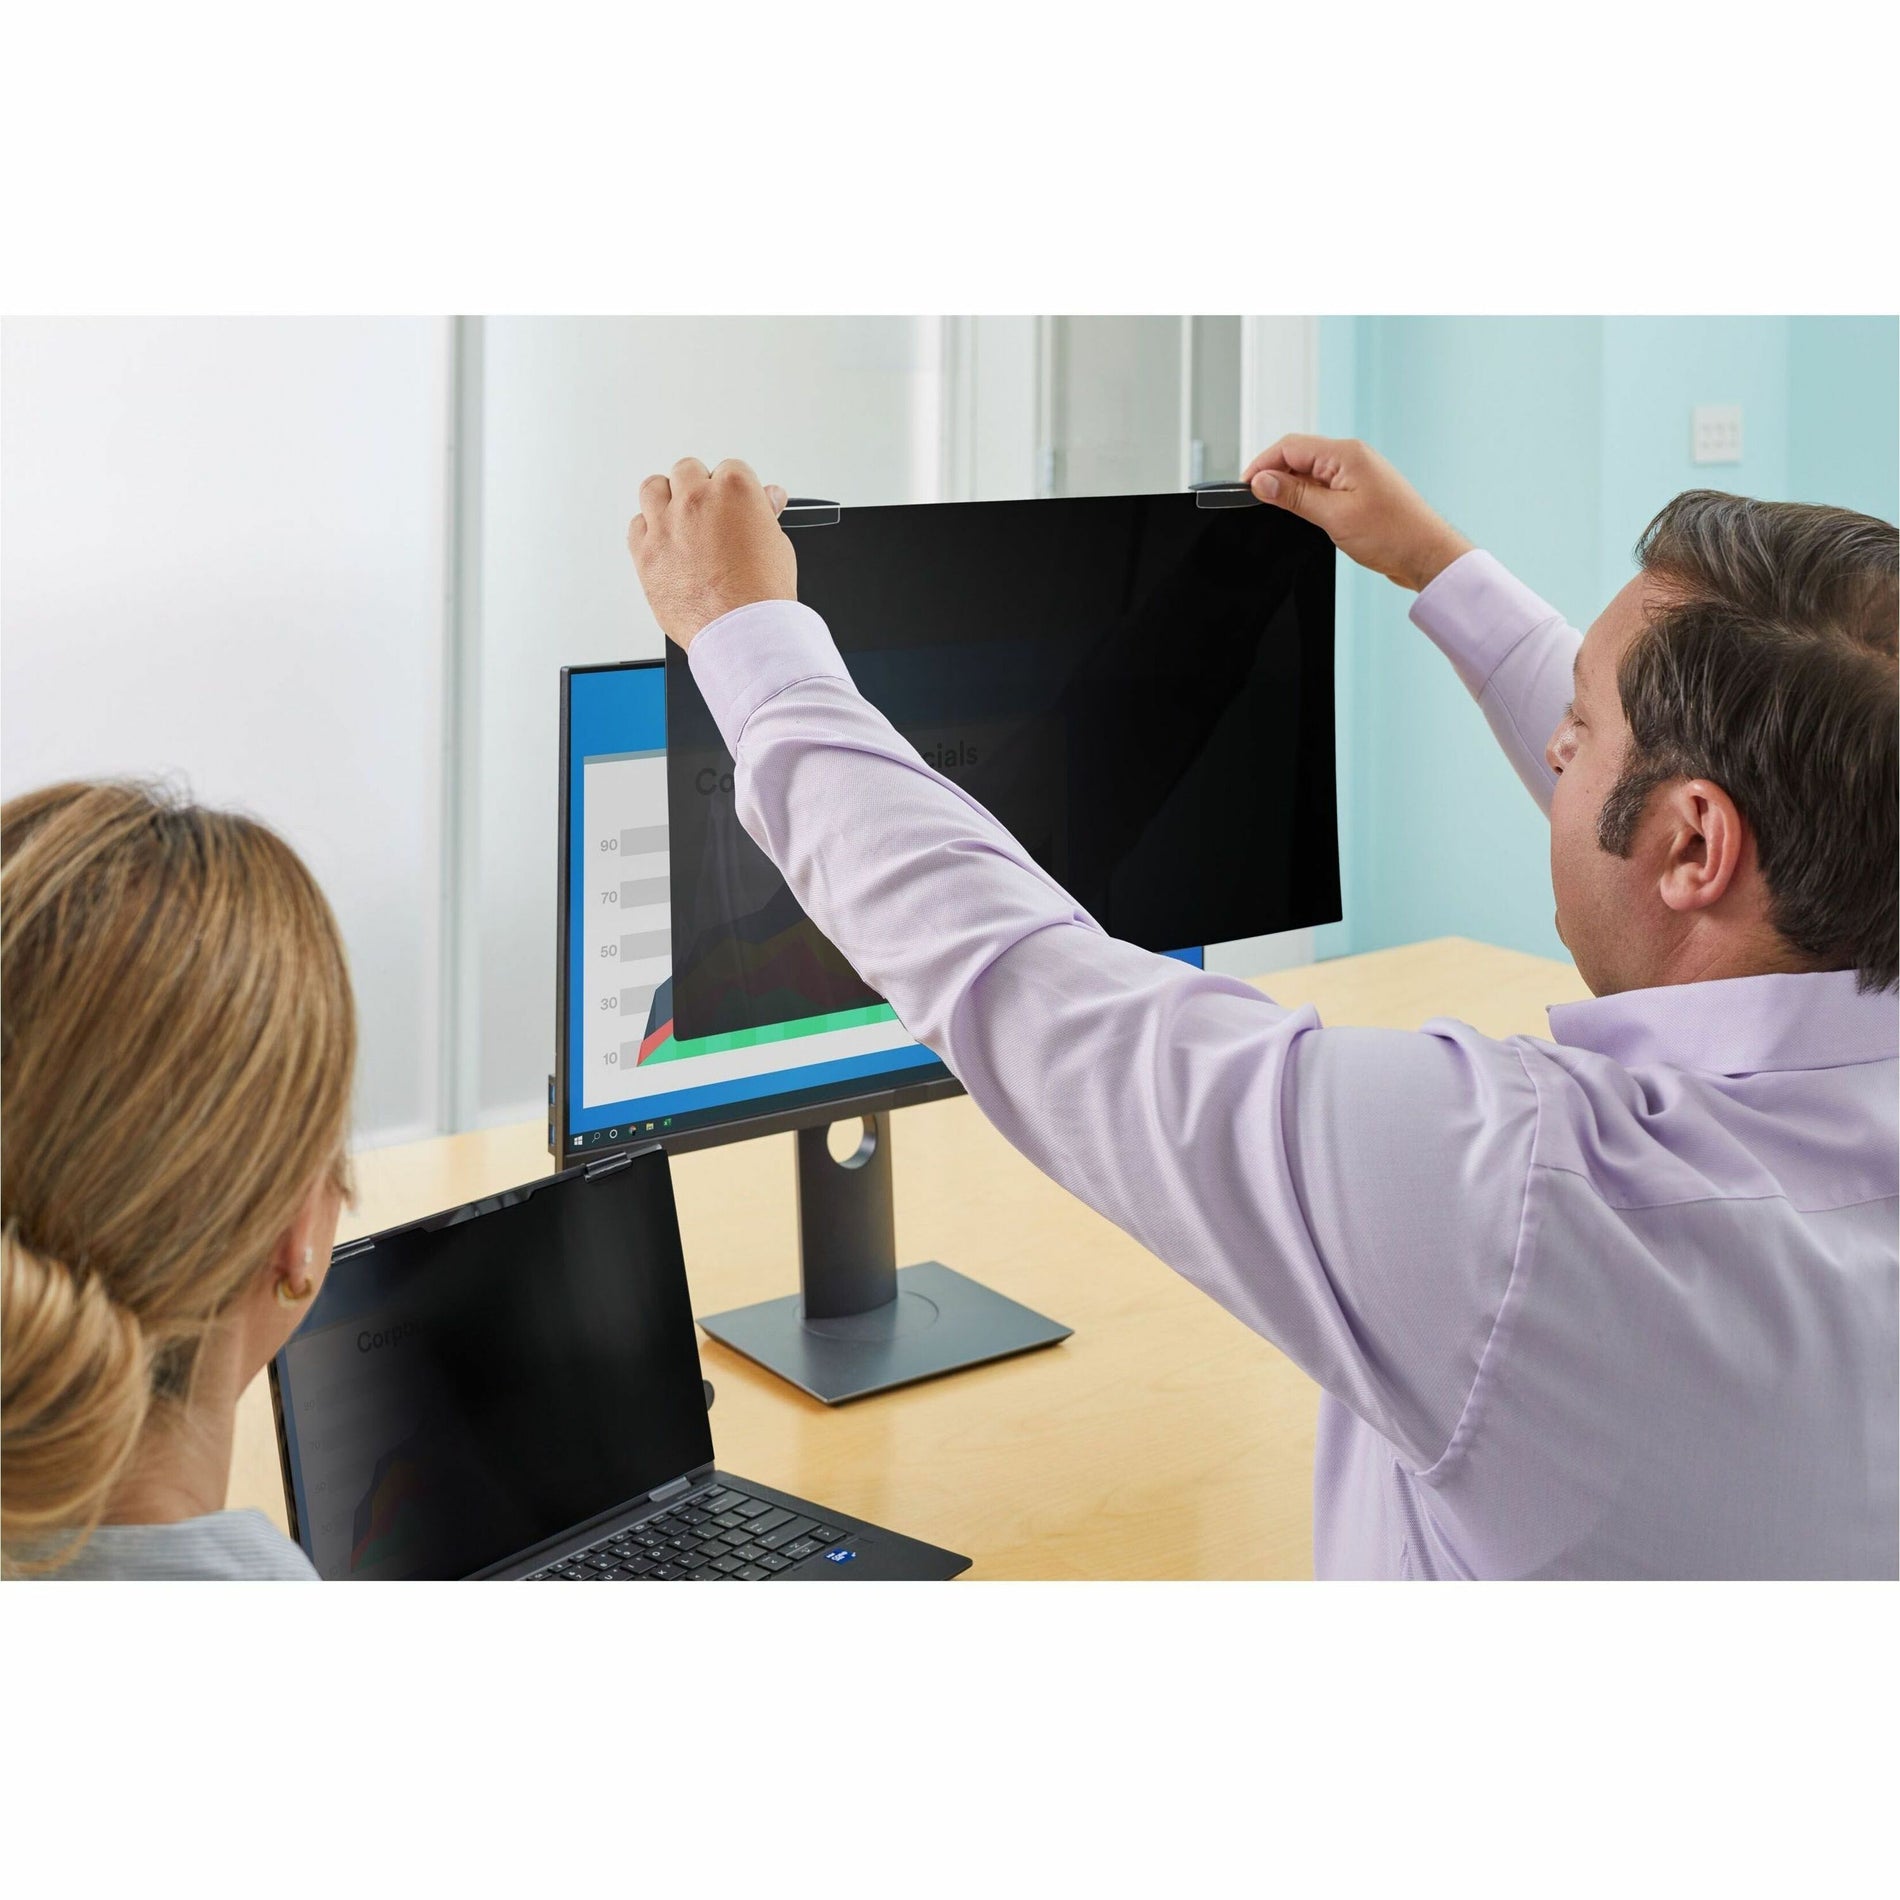 3M PF240W1EM Privacy Screen Filter, 24" Widescreen, Blue Light Reduction, Magnetic Attach